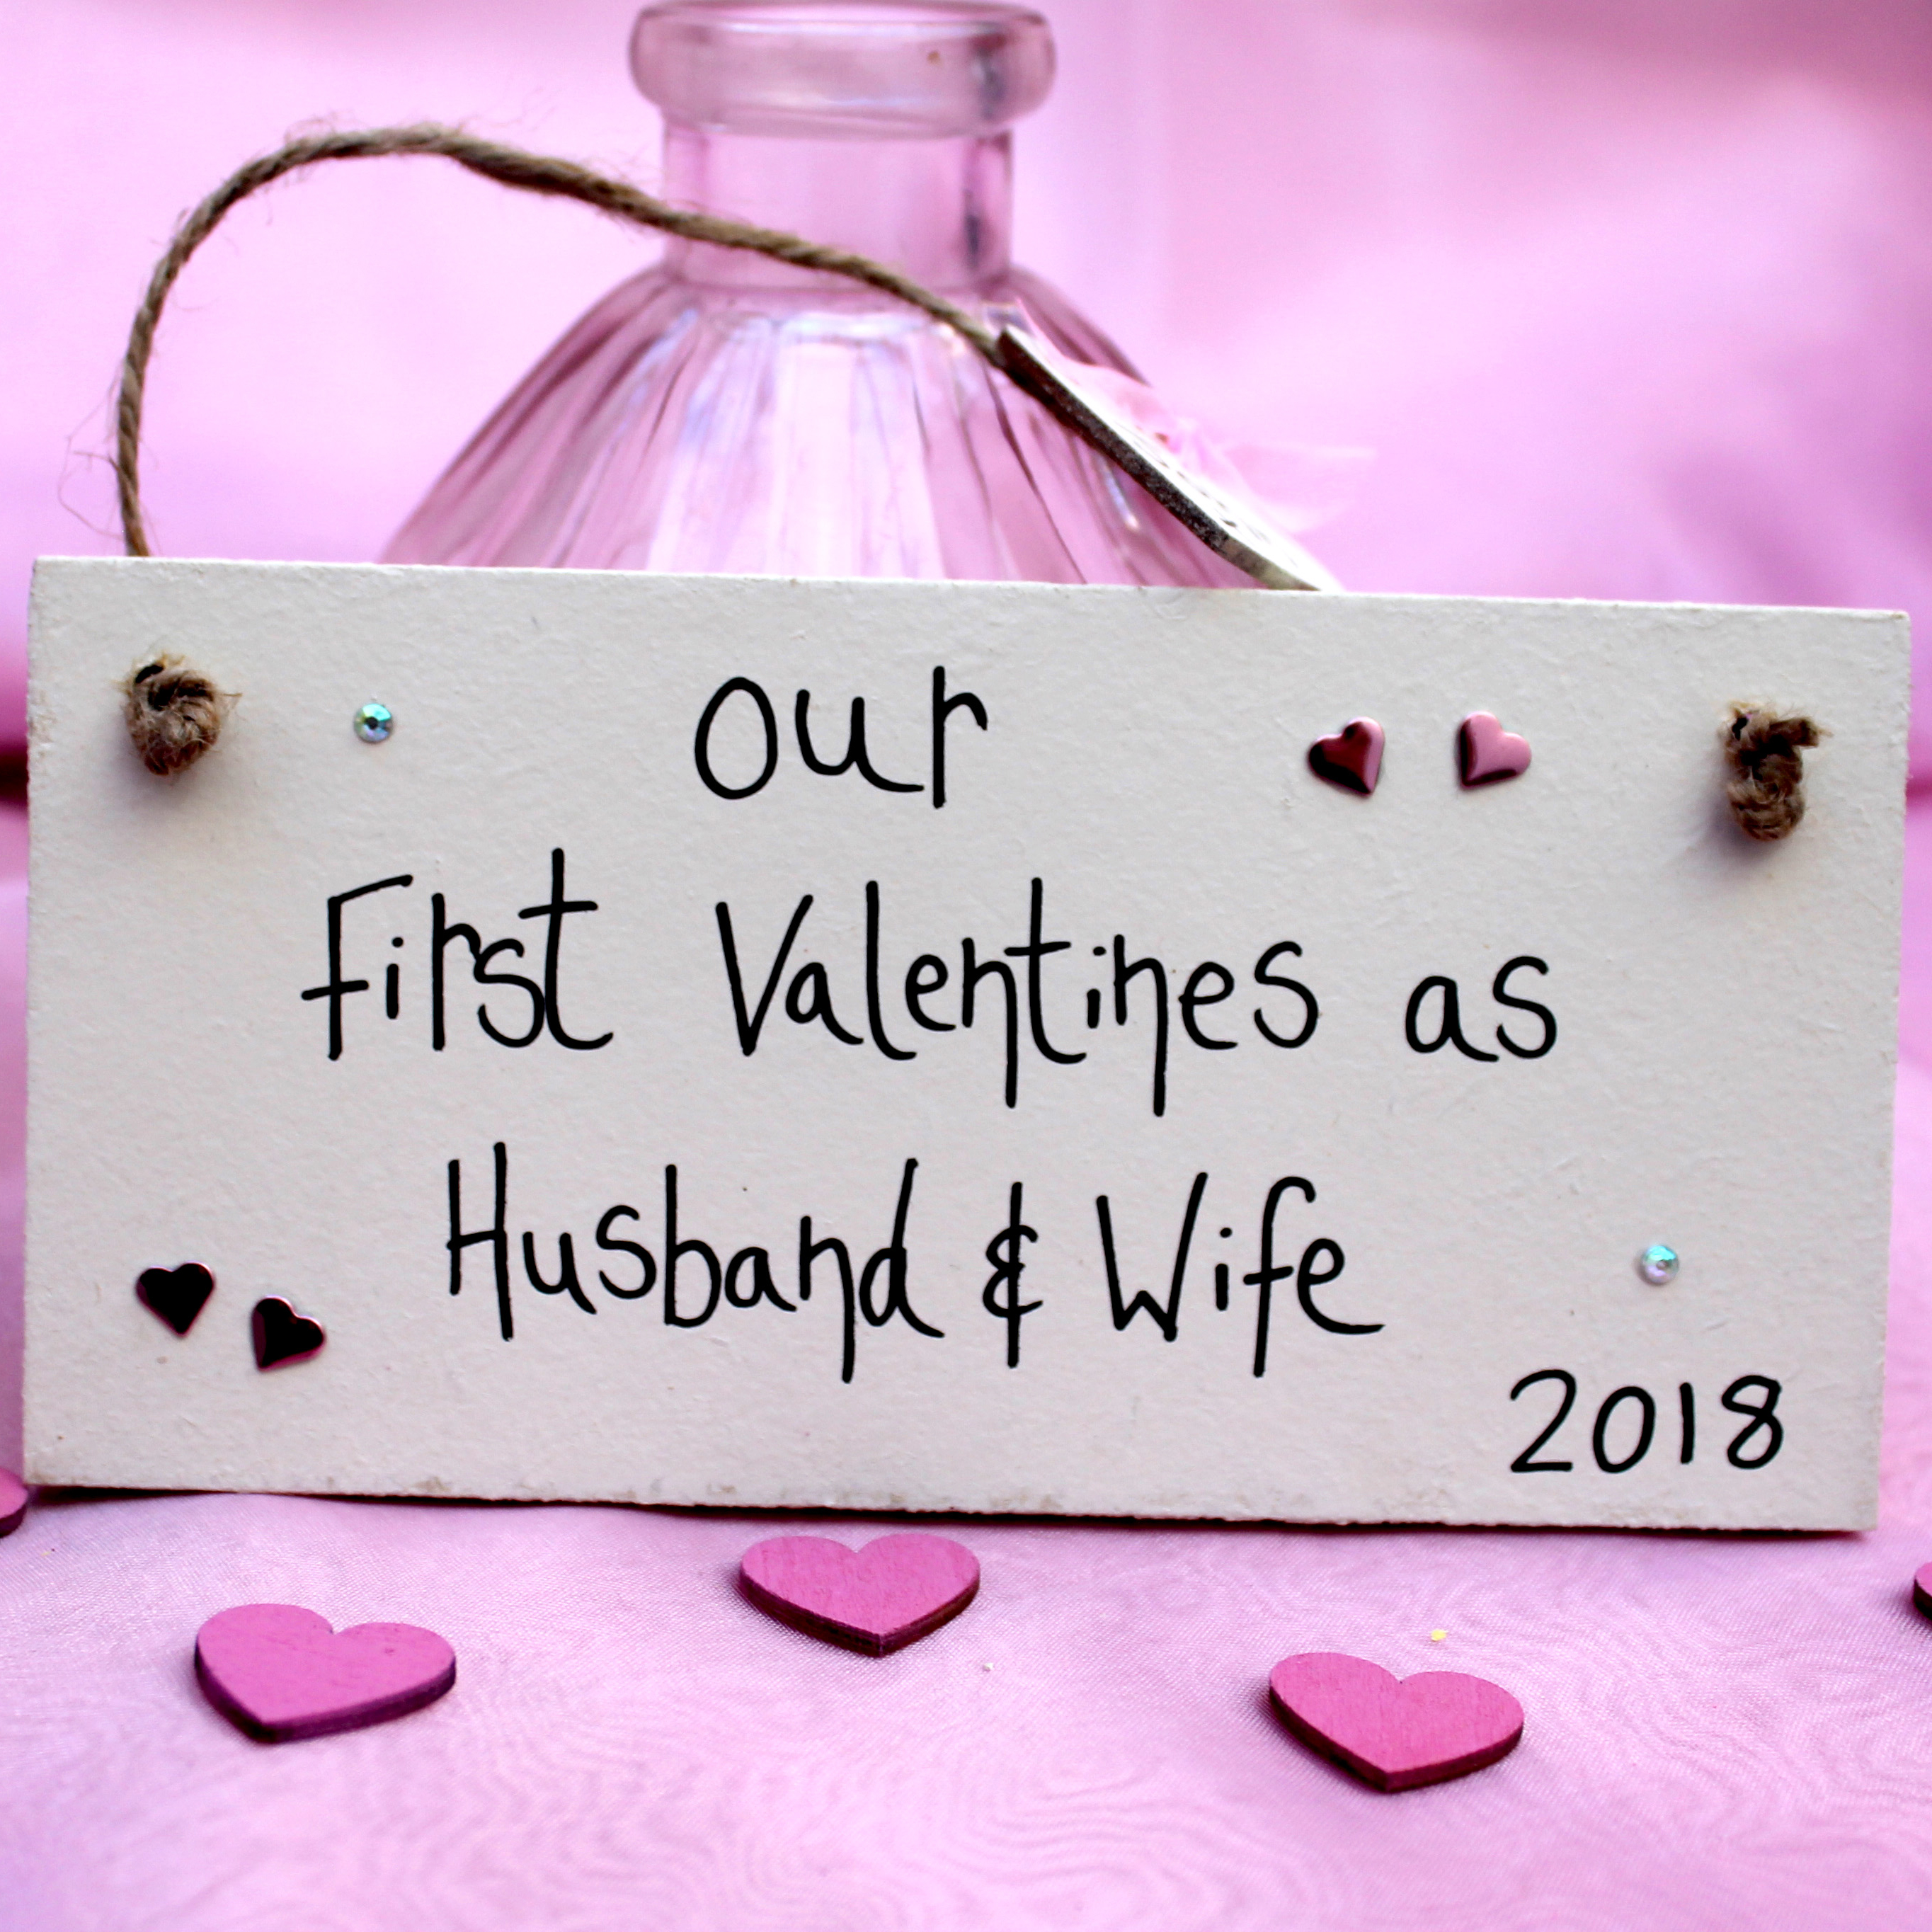 16 Best Ideas To Surprise Your Husband On Valentine's Day